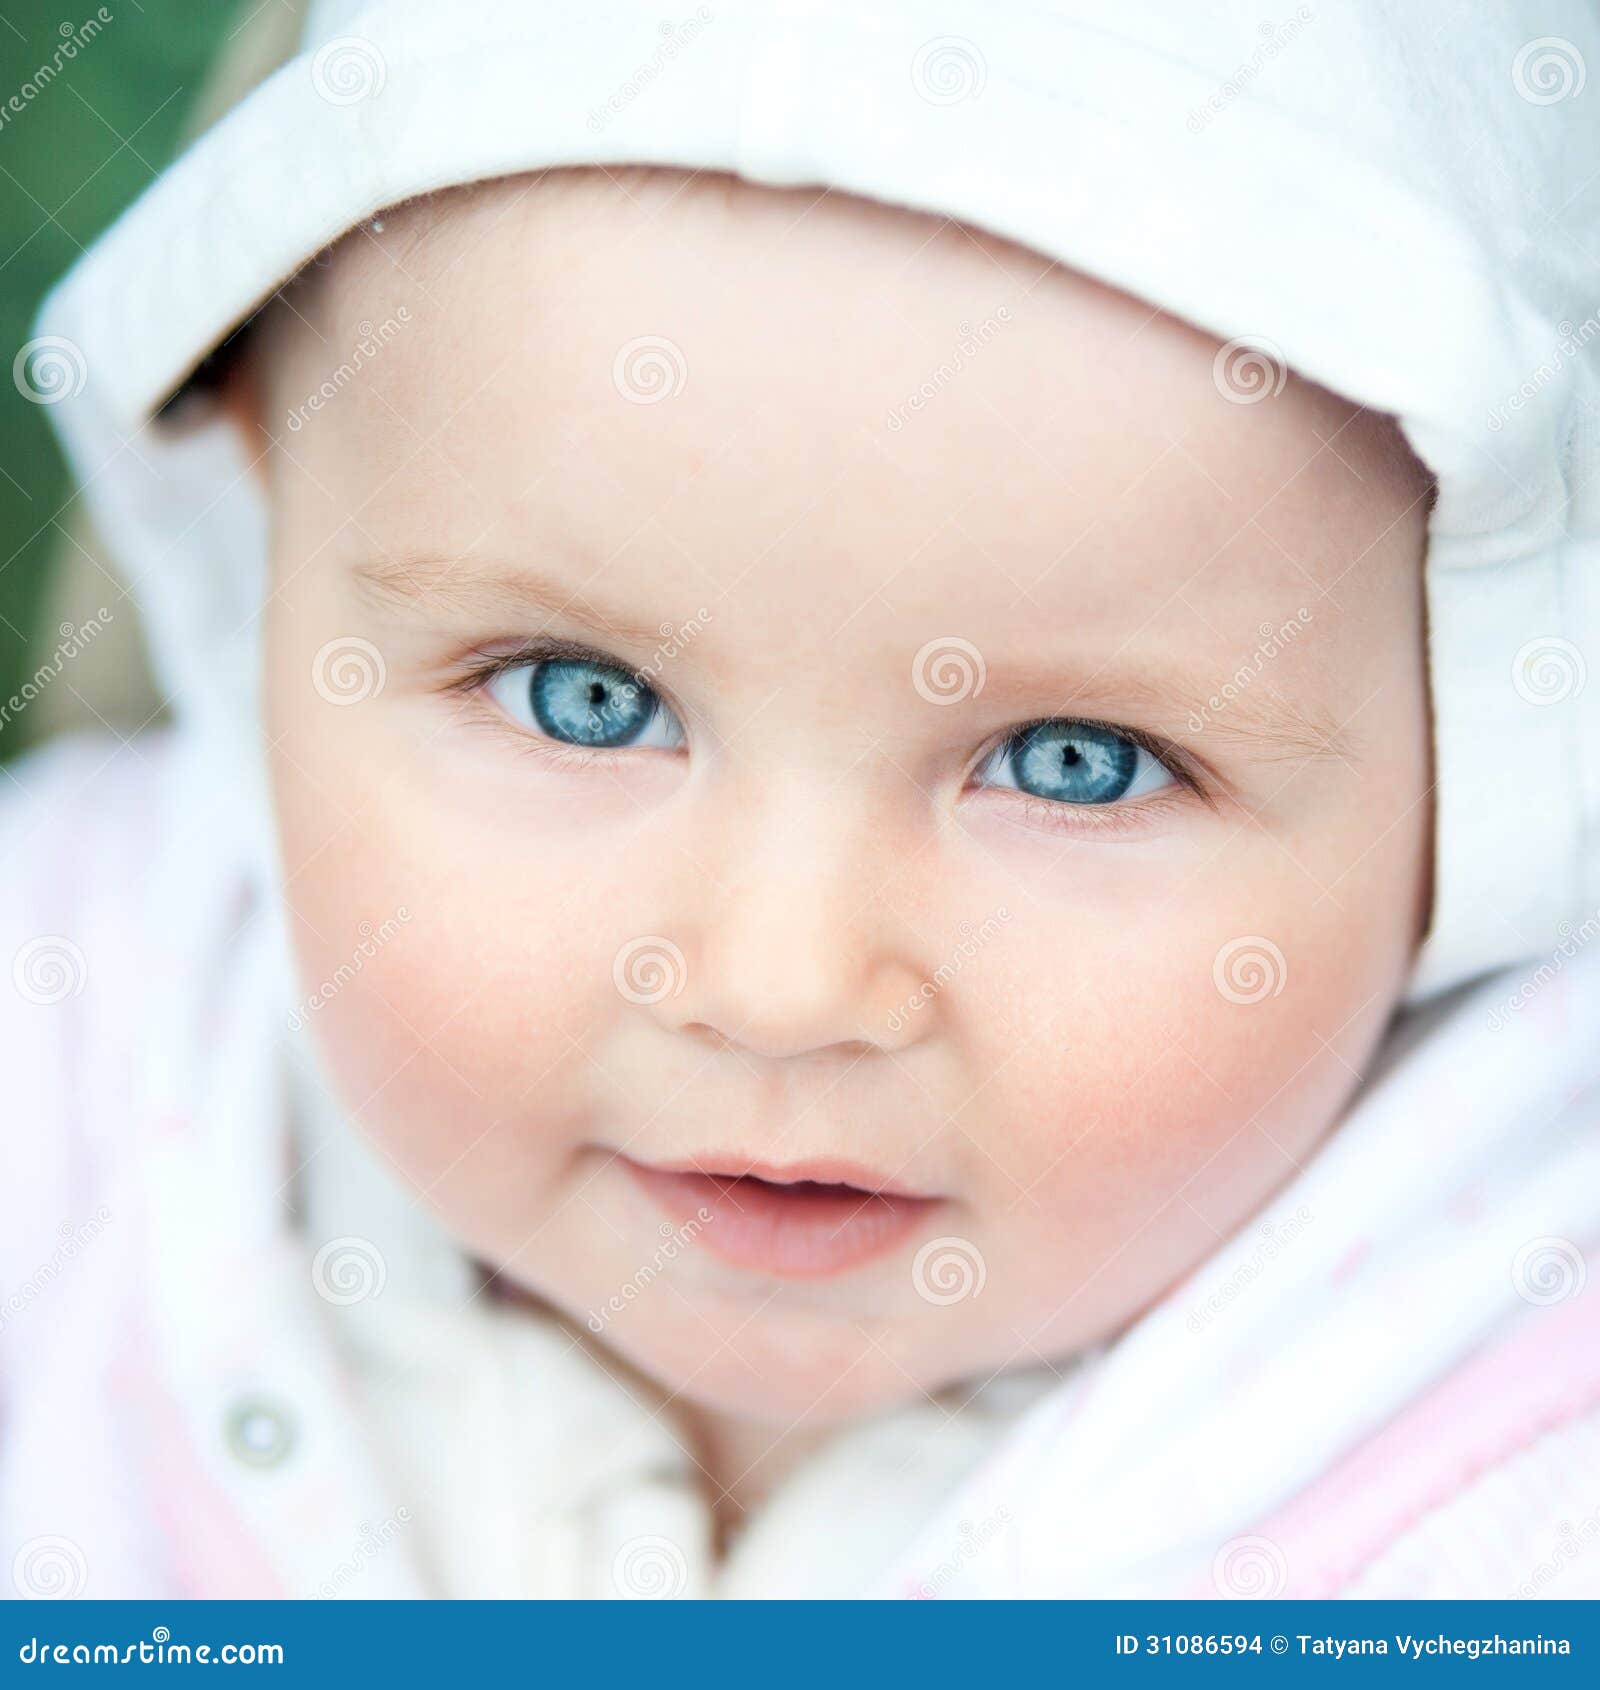 cute white babies with blue eyes